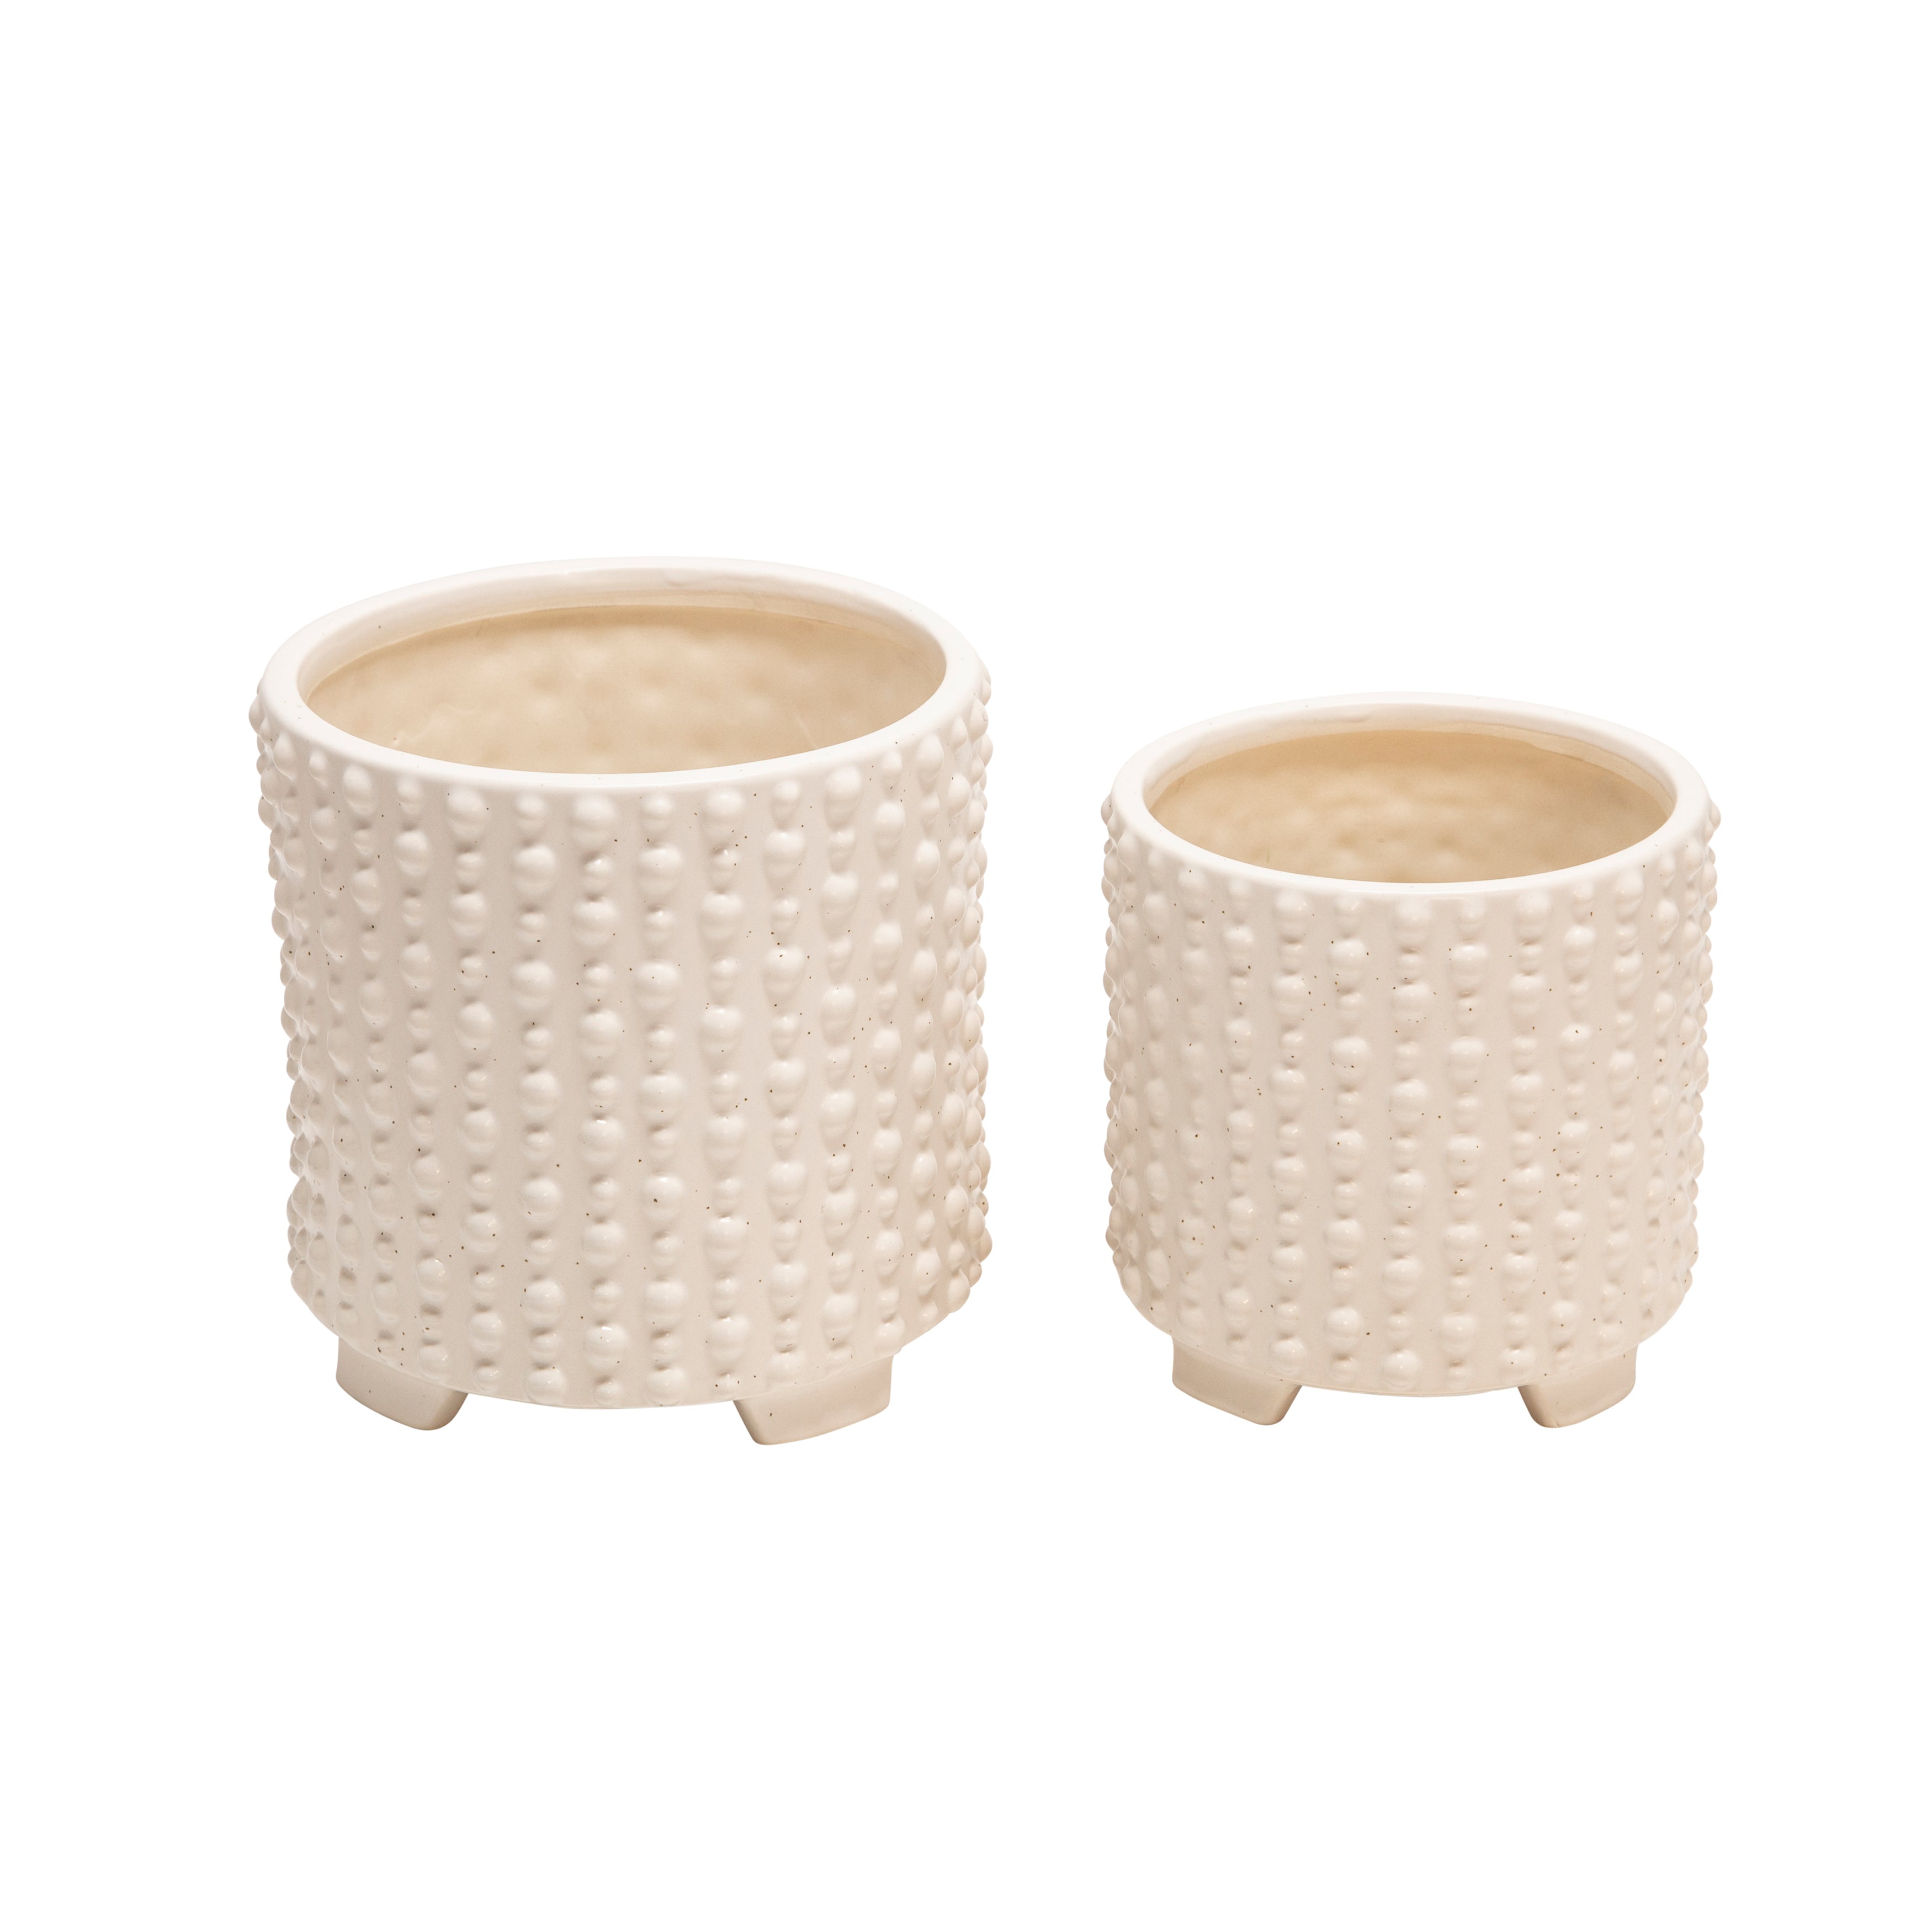 Set of 2 Ceramic Footed Planters with Dots, White, Planters